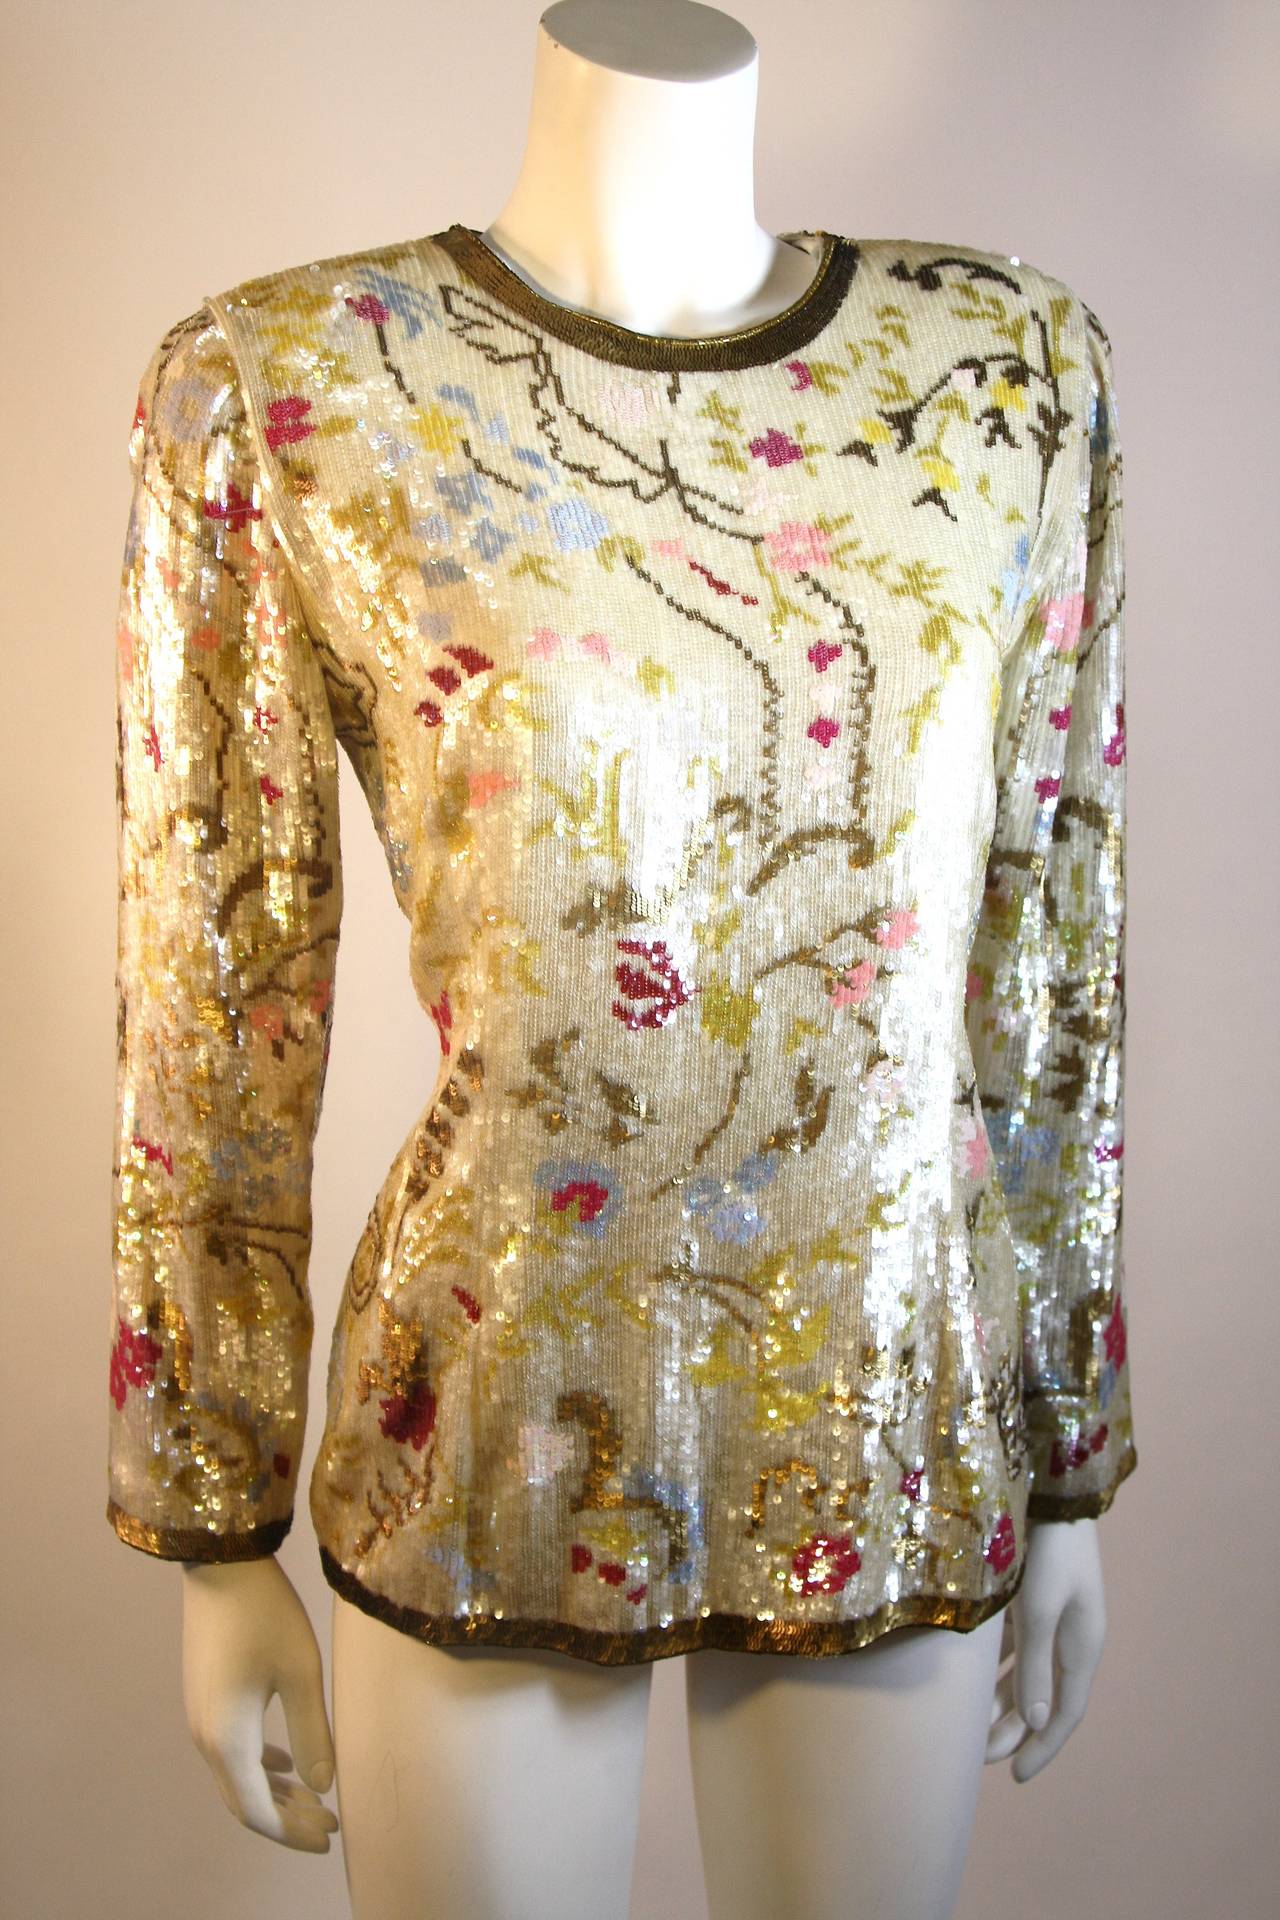 Show stopping cream silk sequin with iridescent gold cast sequins with deep to light pink floral design blouse. Contrasting antique gold sequin trim adds dimension to this already stunning piece by Oscar de la Renta.
Hidden back zipper, Made in the